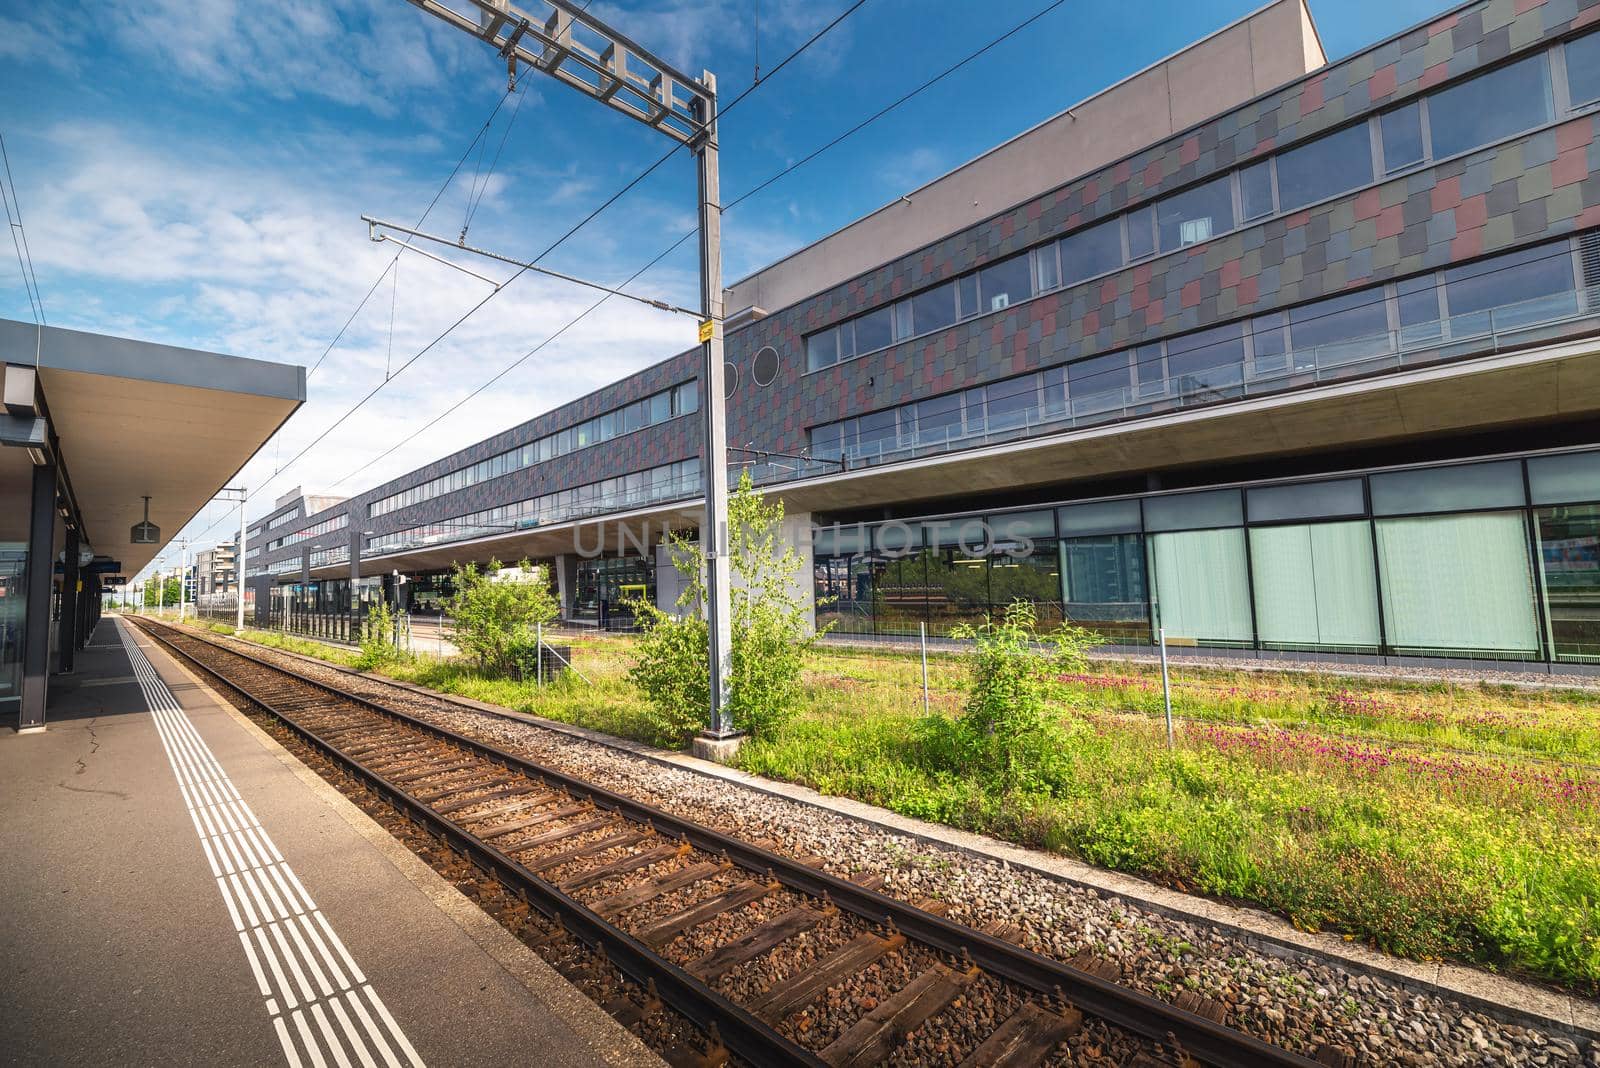 Train Station Platform in Urban Zurich City, Switzerland, Public Metro Transit and Infrastructure of Swiss Trains. Perspective View of Railway and Modern Architecture Building Background. Swiss Travel